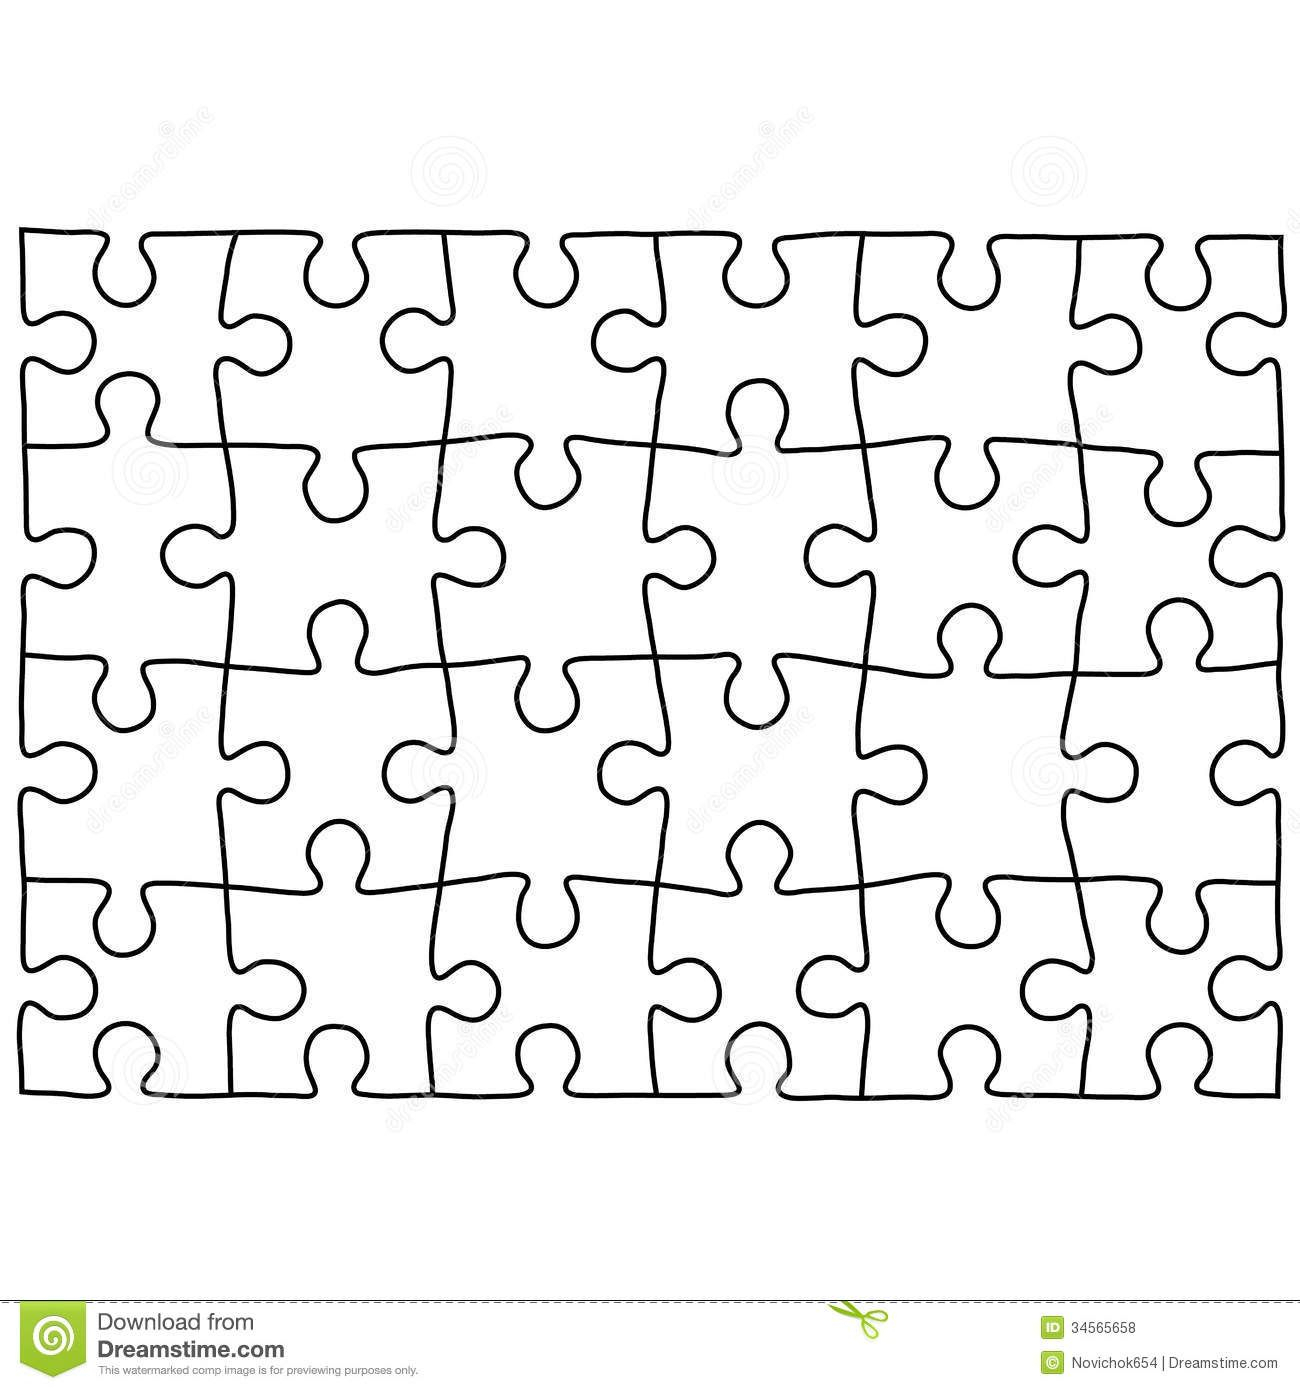 Jigsaw Puzzle Design Template | Free Puzzle Templates Within Jigsaw Puzzle Template For Word